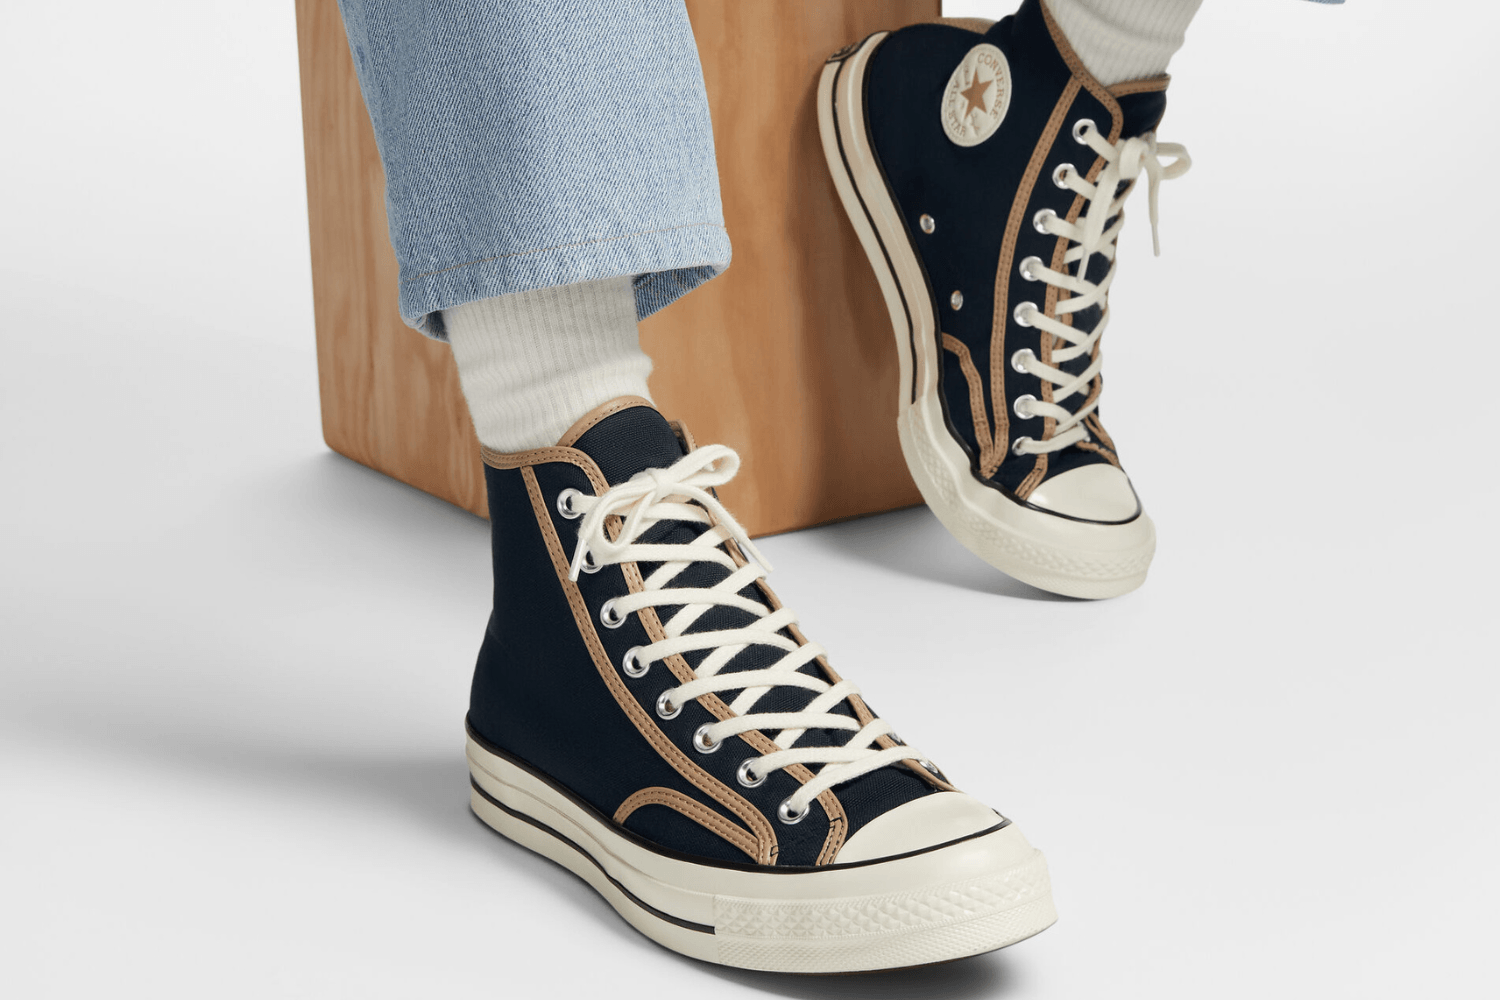 Converse presents a mid-season sale with up to 50% discount